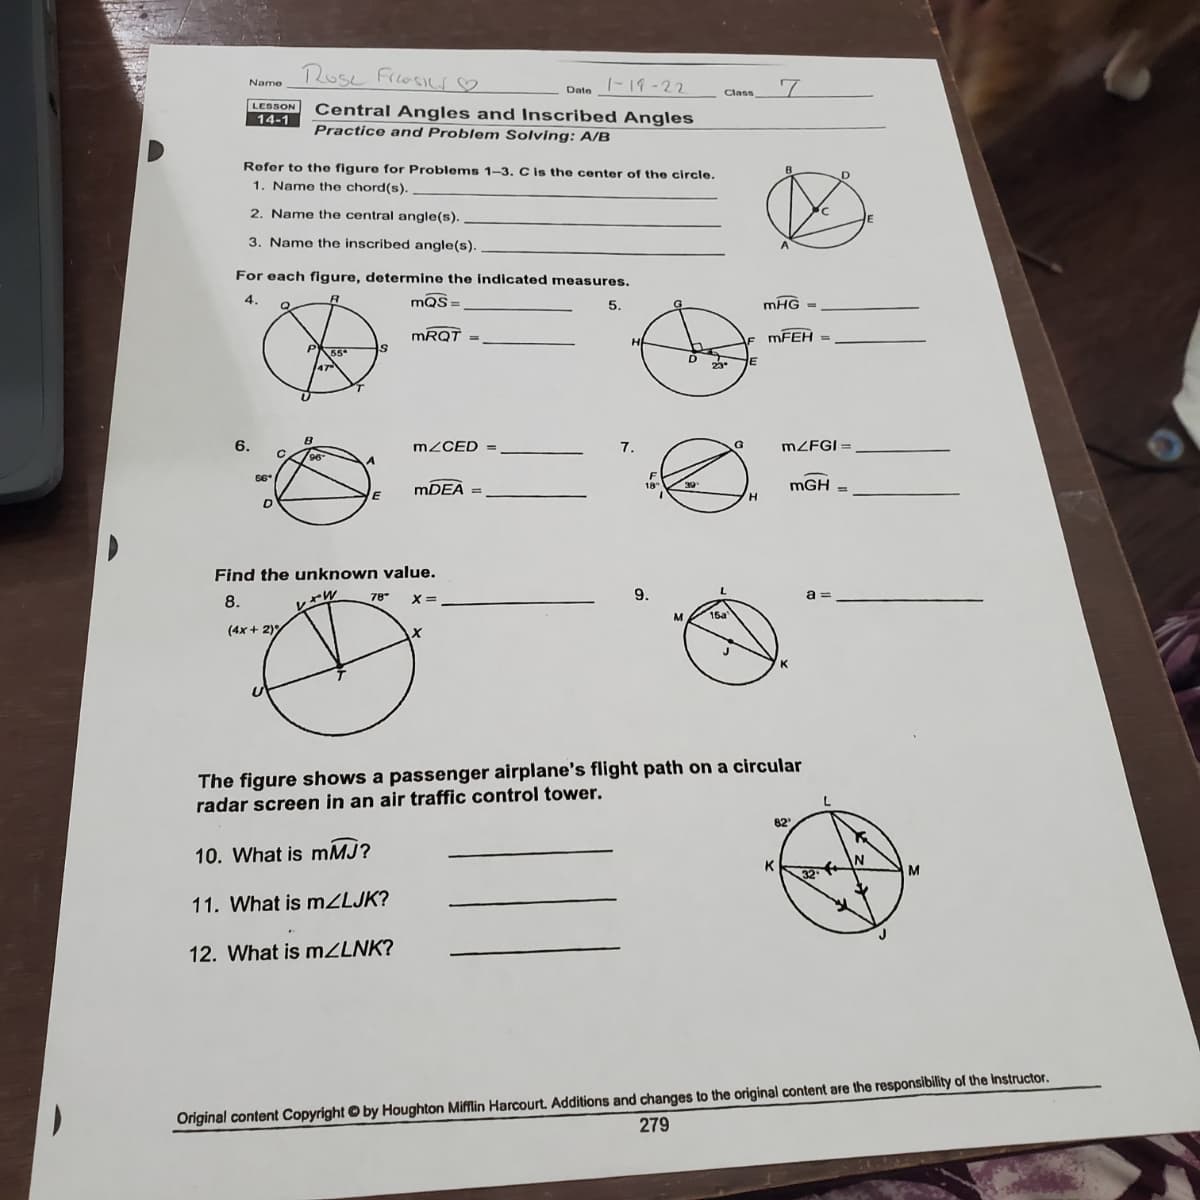 Rose Friosilr♡
|-19-22
Name
Date
Class
LESSON
Central Angles and Inscribed Angles
Practice and Problem Solving: A/B
14-1
Rofer to the figure for Problems 1-3. Cis the center of the circle.
D
1. Name the chord(s).
2. Name the central angle(s).
3. Name the inscribed angle(s).
For each figure, determine the indicated measures.
4.
mQS =
5.
mHG =
MRQT
MFEH =
H
55
E
47
6.
MZCED =
7.
MZFGI =
%3D
96
6*
MDEA =
mGH
18"
%3D
H.
Find the unknown value.
8.
78
X =
x= -
9.
a =
レャル
M
15a
(4x + 2)
The figure shows a passenger airplane's flight path on a circular
radar screen in an air traffic control tower.
82'
10. What is mMJ?
K
M
32
11. What is M2LJK?
12. What is MZLNK?
Original content Copyright © by Houghton Mifflin Harcourt. Additions and changes to the original content are the responsibility of the Instructor.
279
